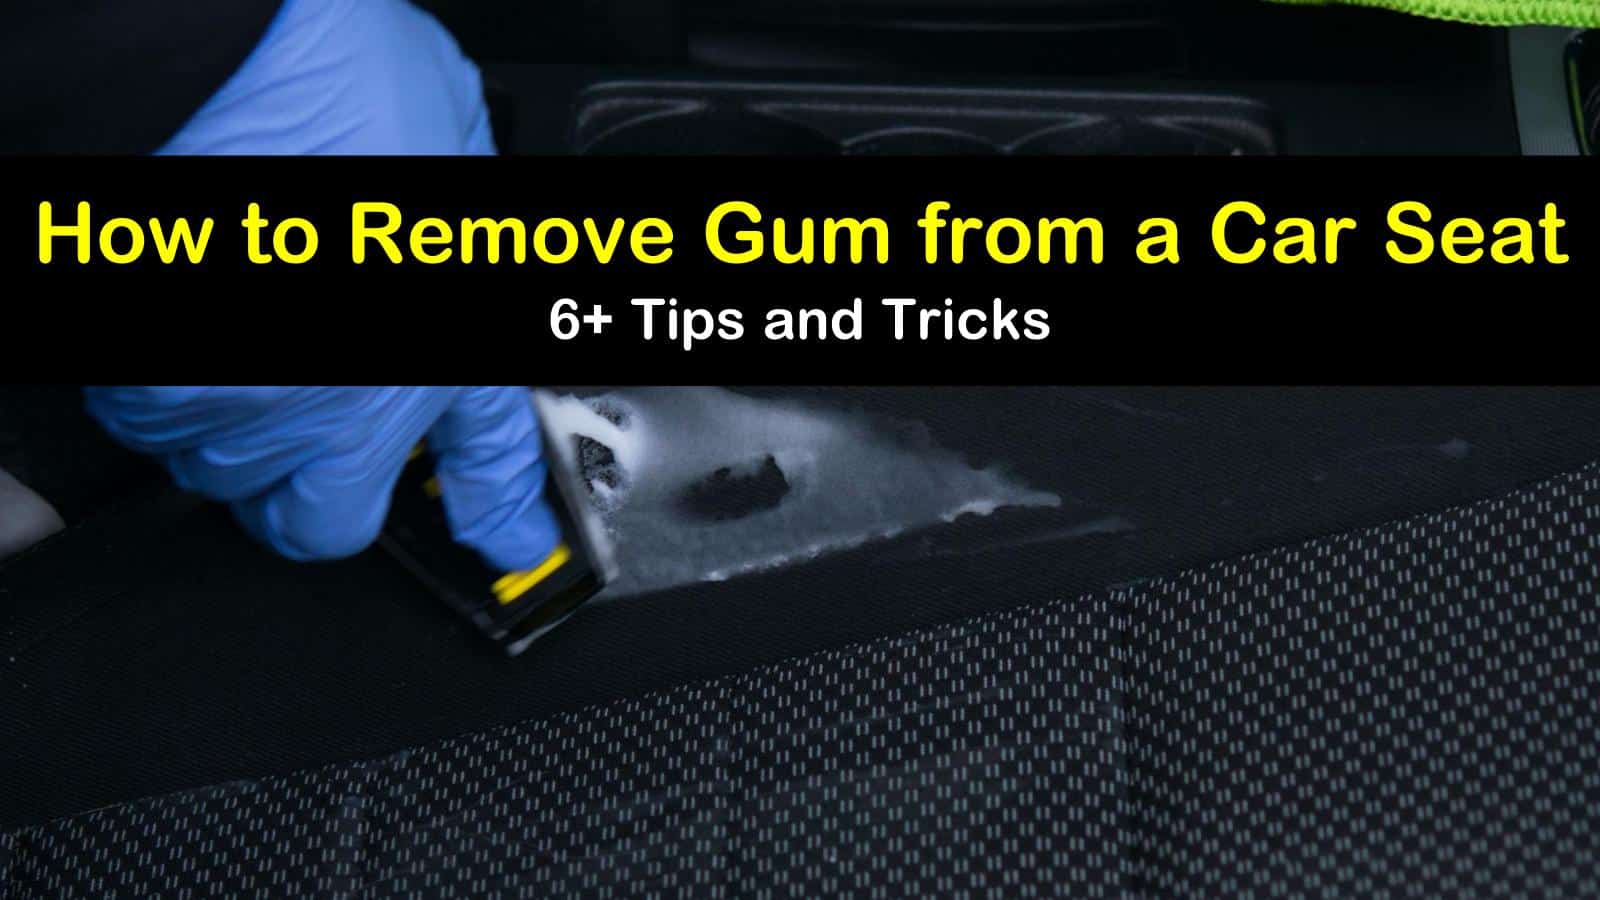 how to remove gum from a car seat titleimg1